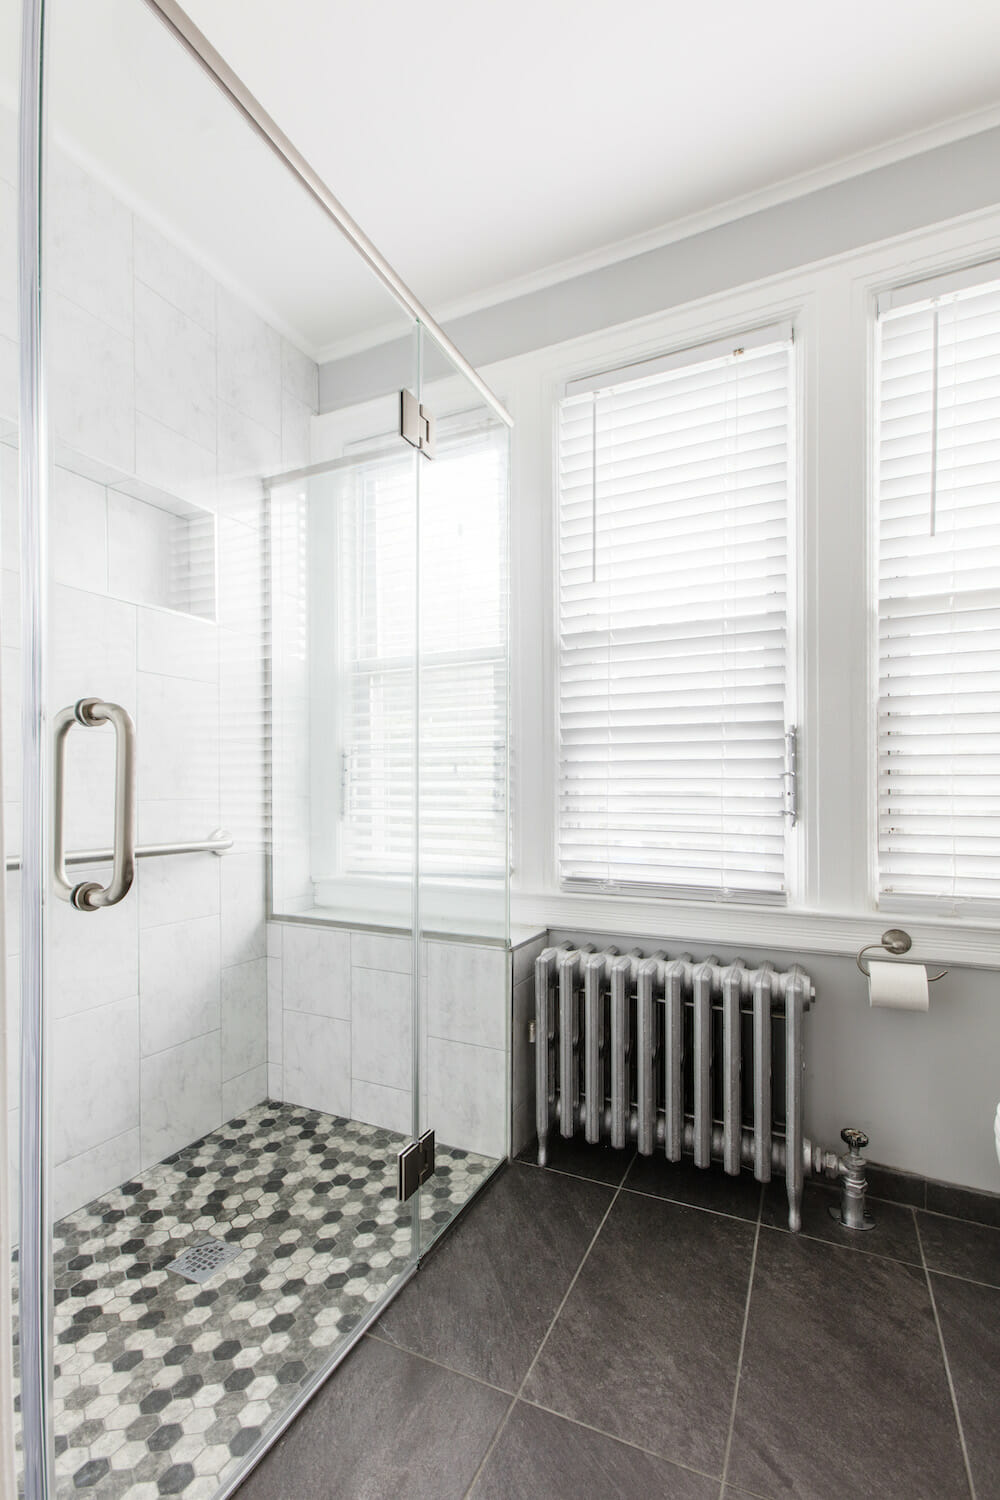 This curbless shower makes it easy to access for wheel-chair or walker-bound individuals